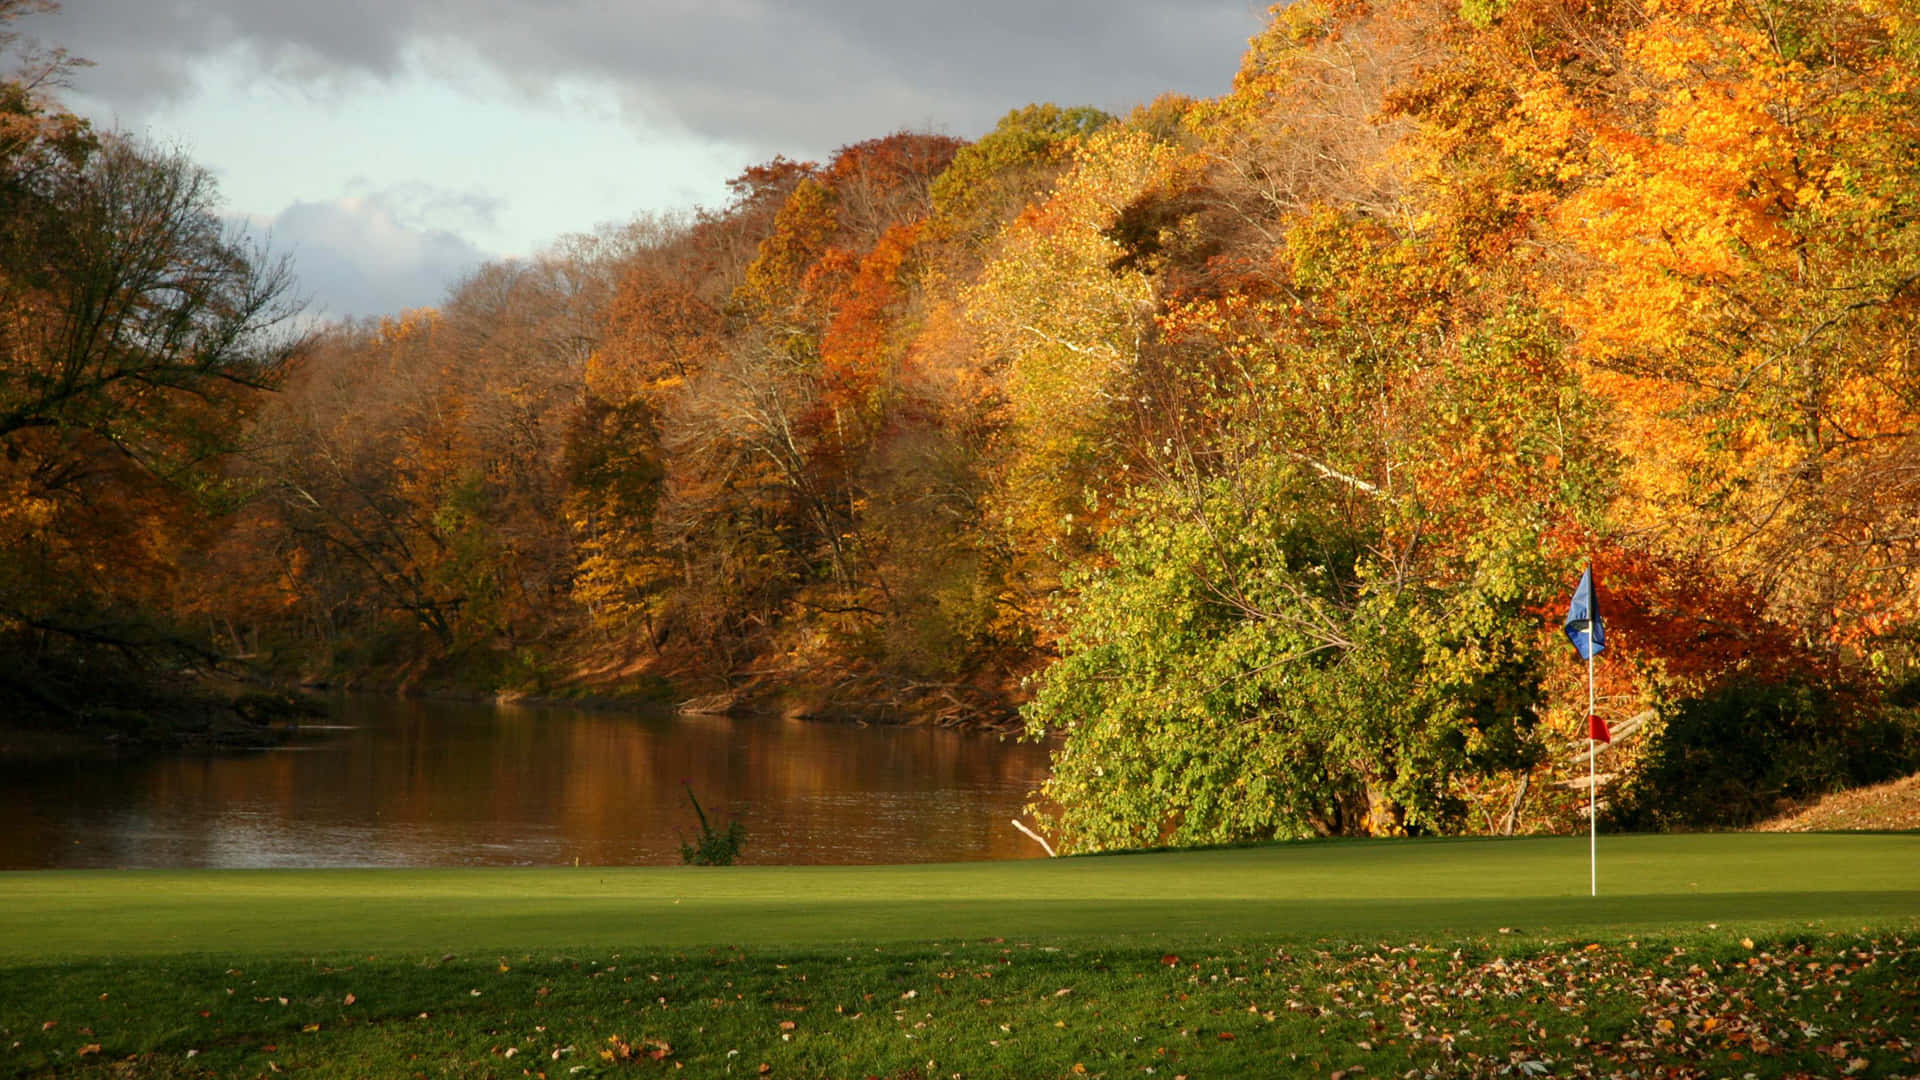 Autumn On Hd Golf Course Background